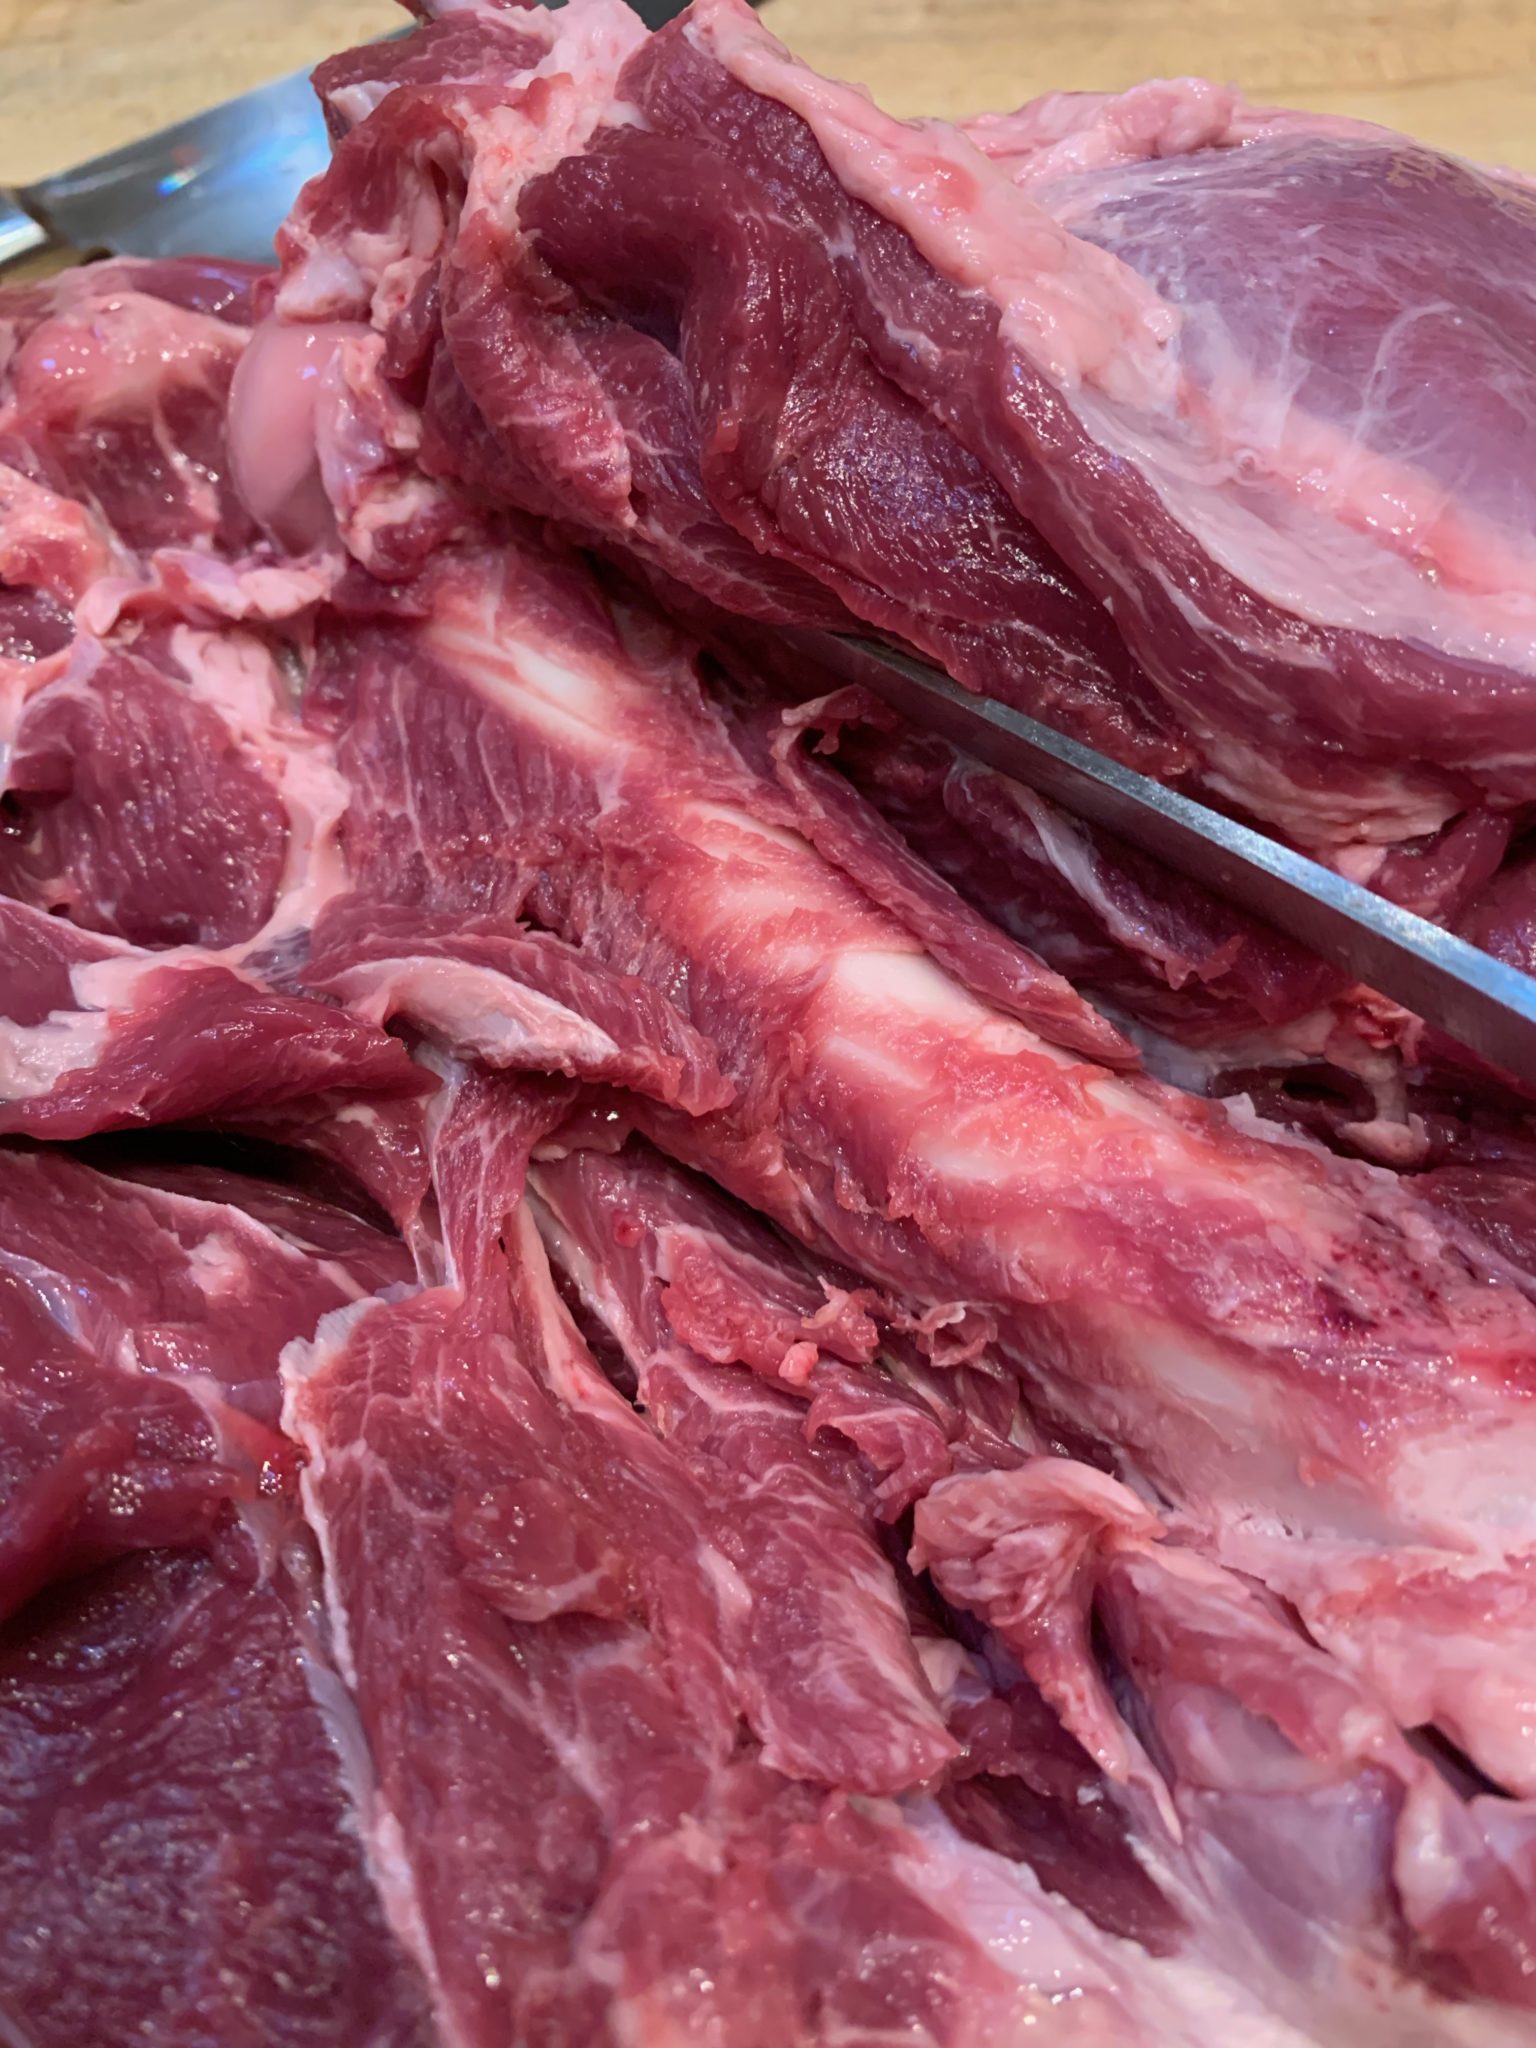 removing the bone from a whole leg of lamb